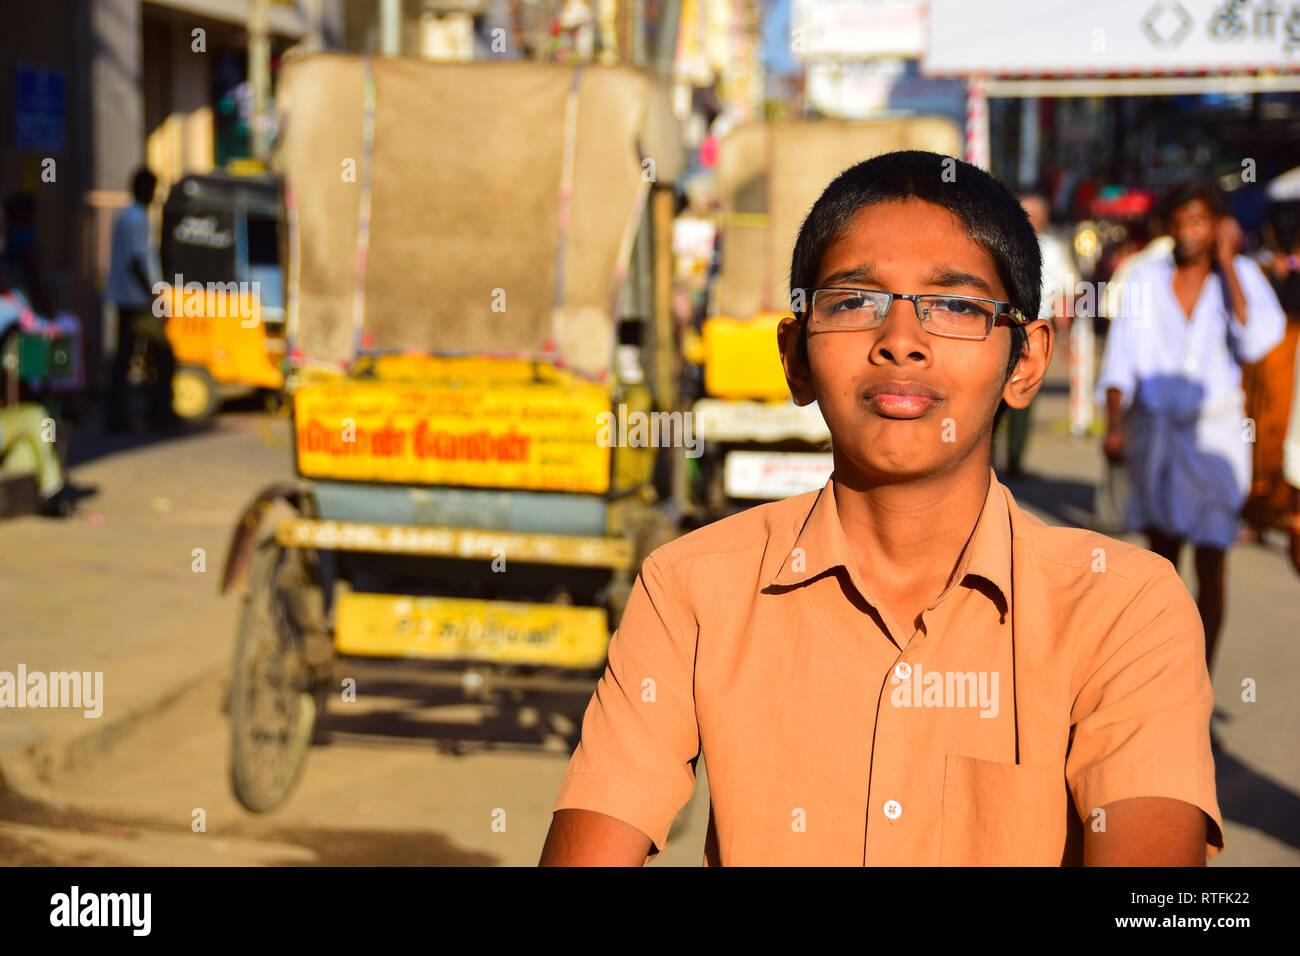 Indian boy with spectacles, Madurai, Tamil Nadu, India Stock Photo